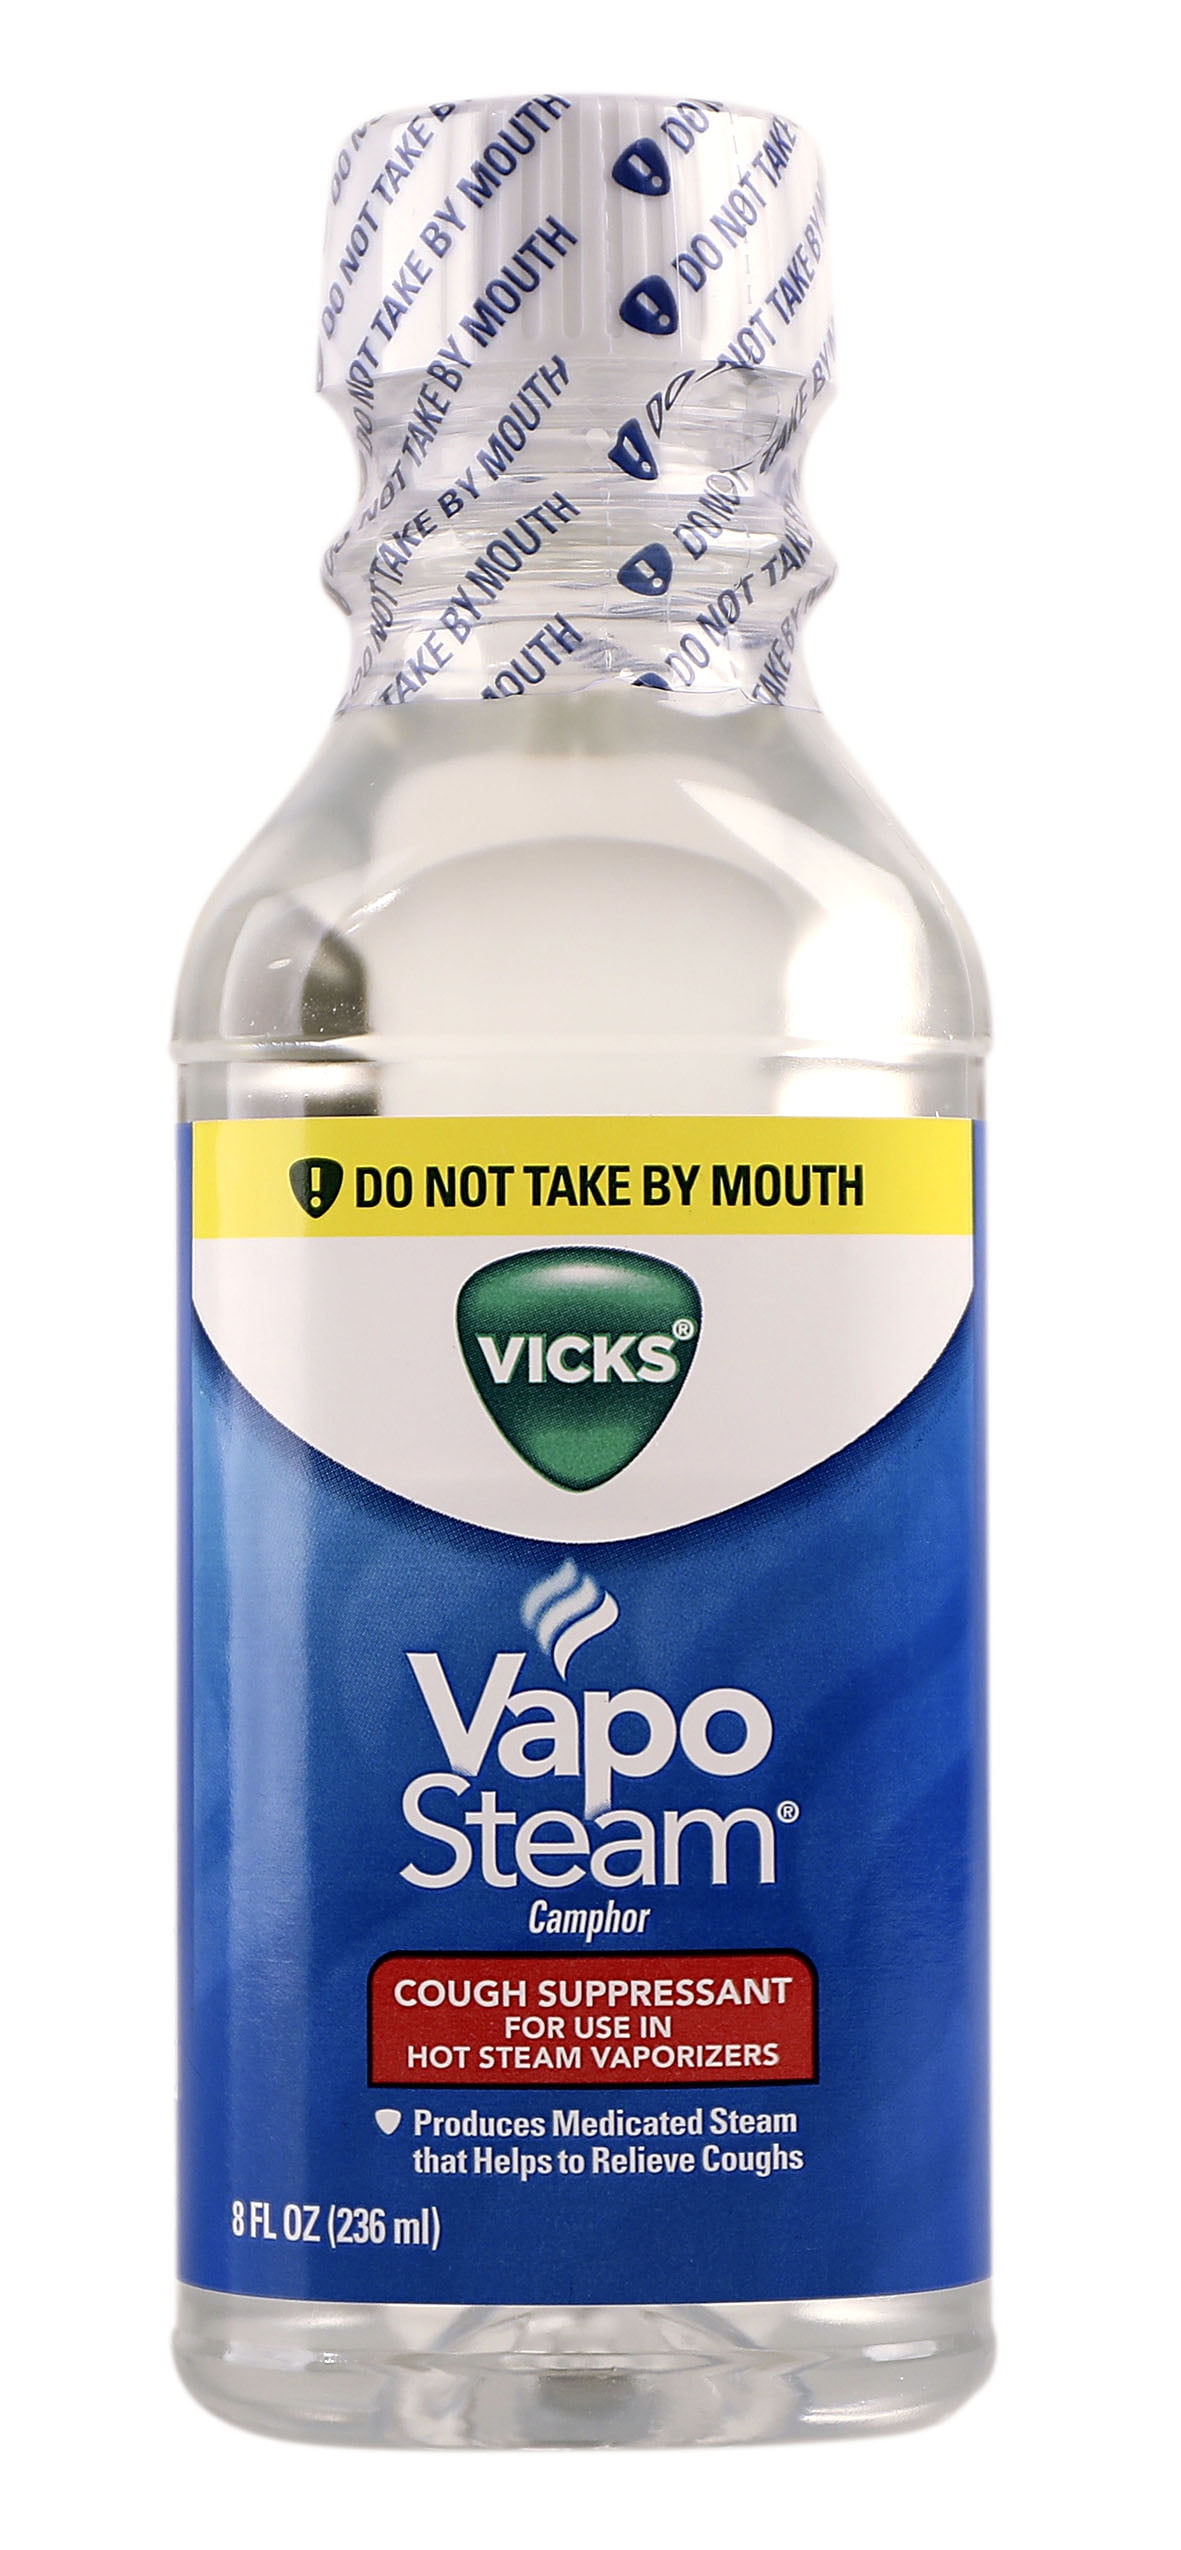 Vicks VapoSteam, For Use in Vicks Vaporizers and Humidifiers, 8 fl oz